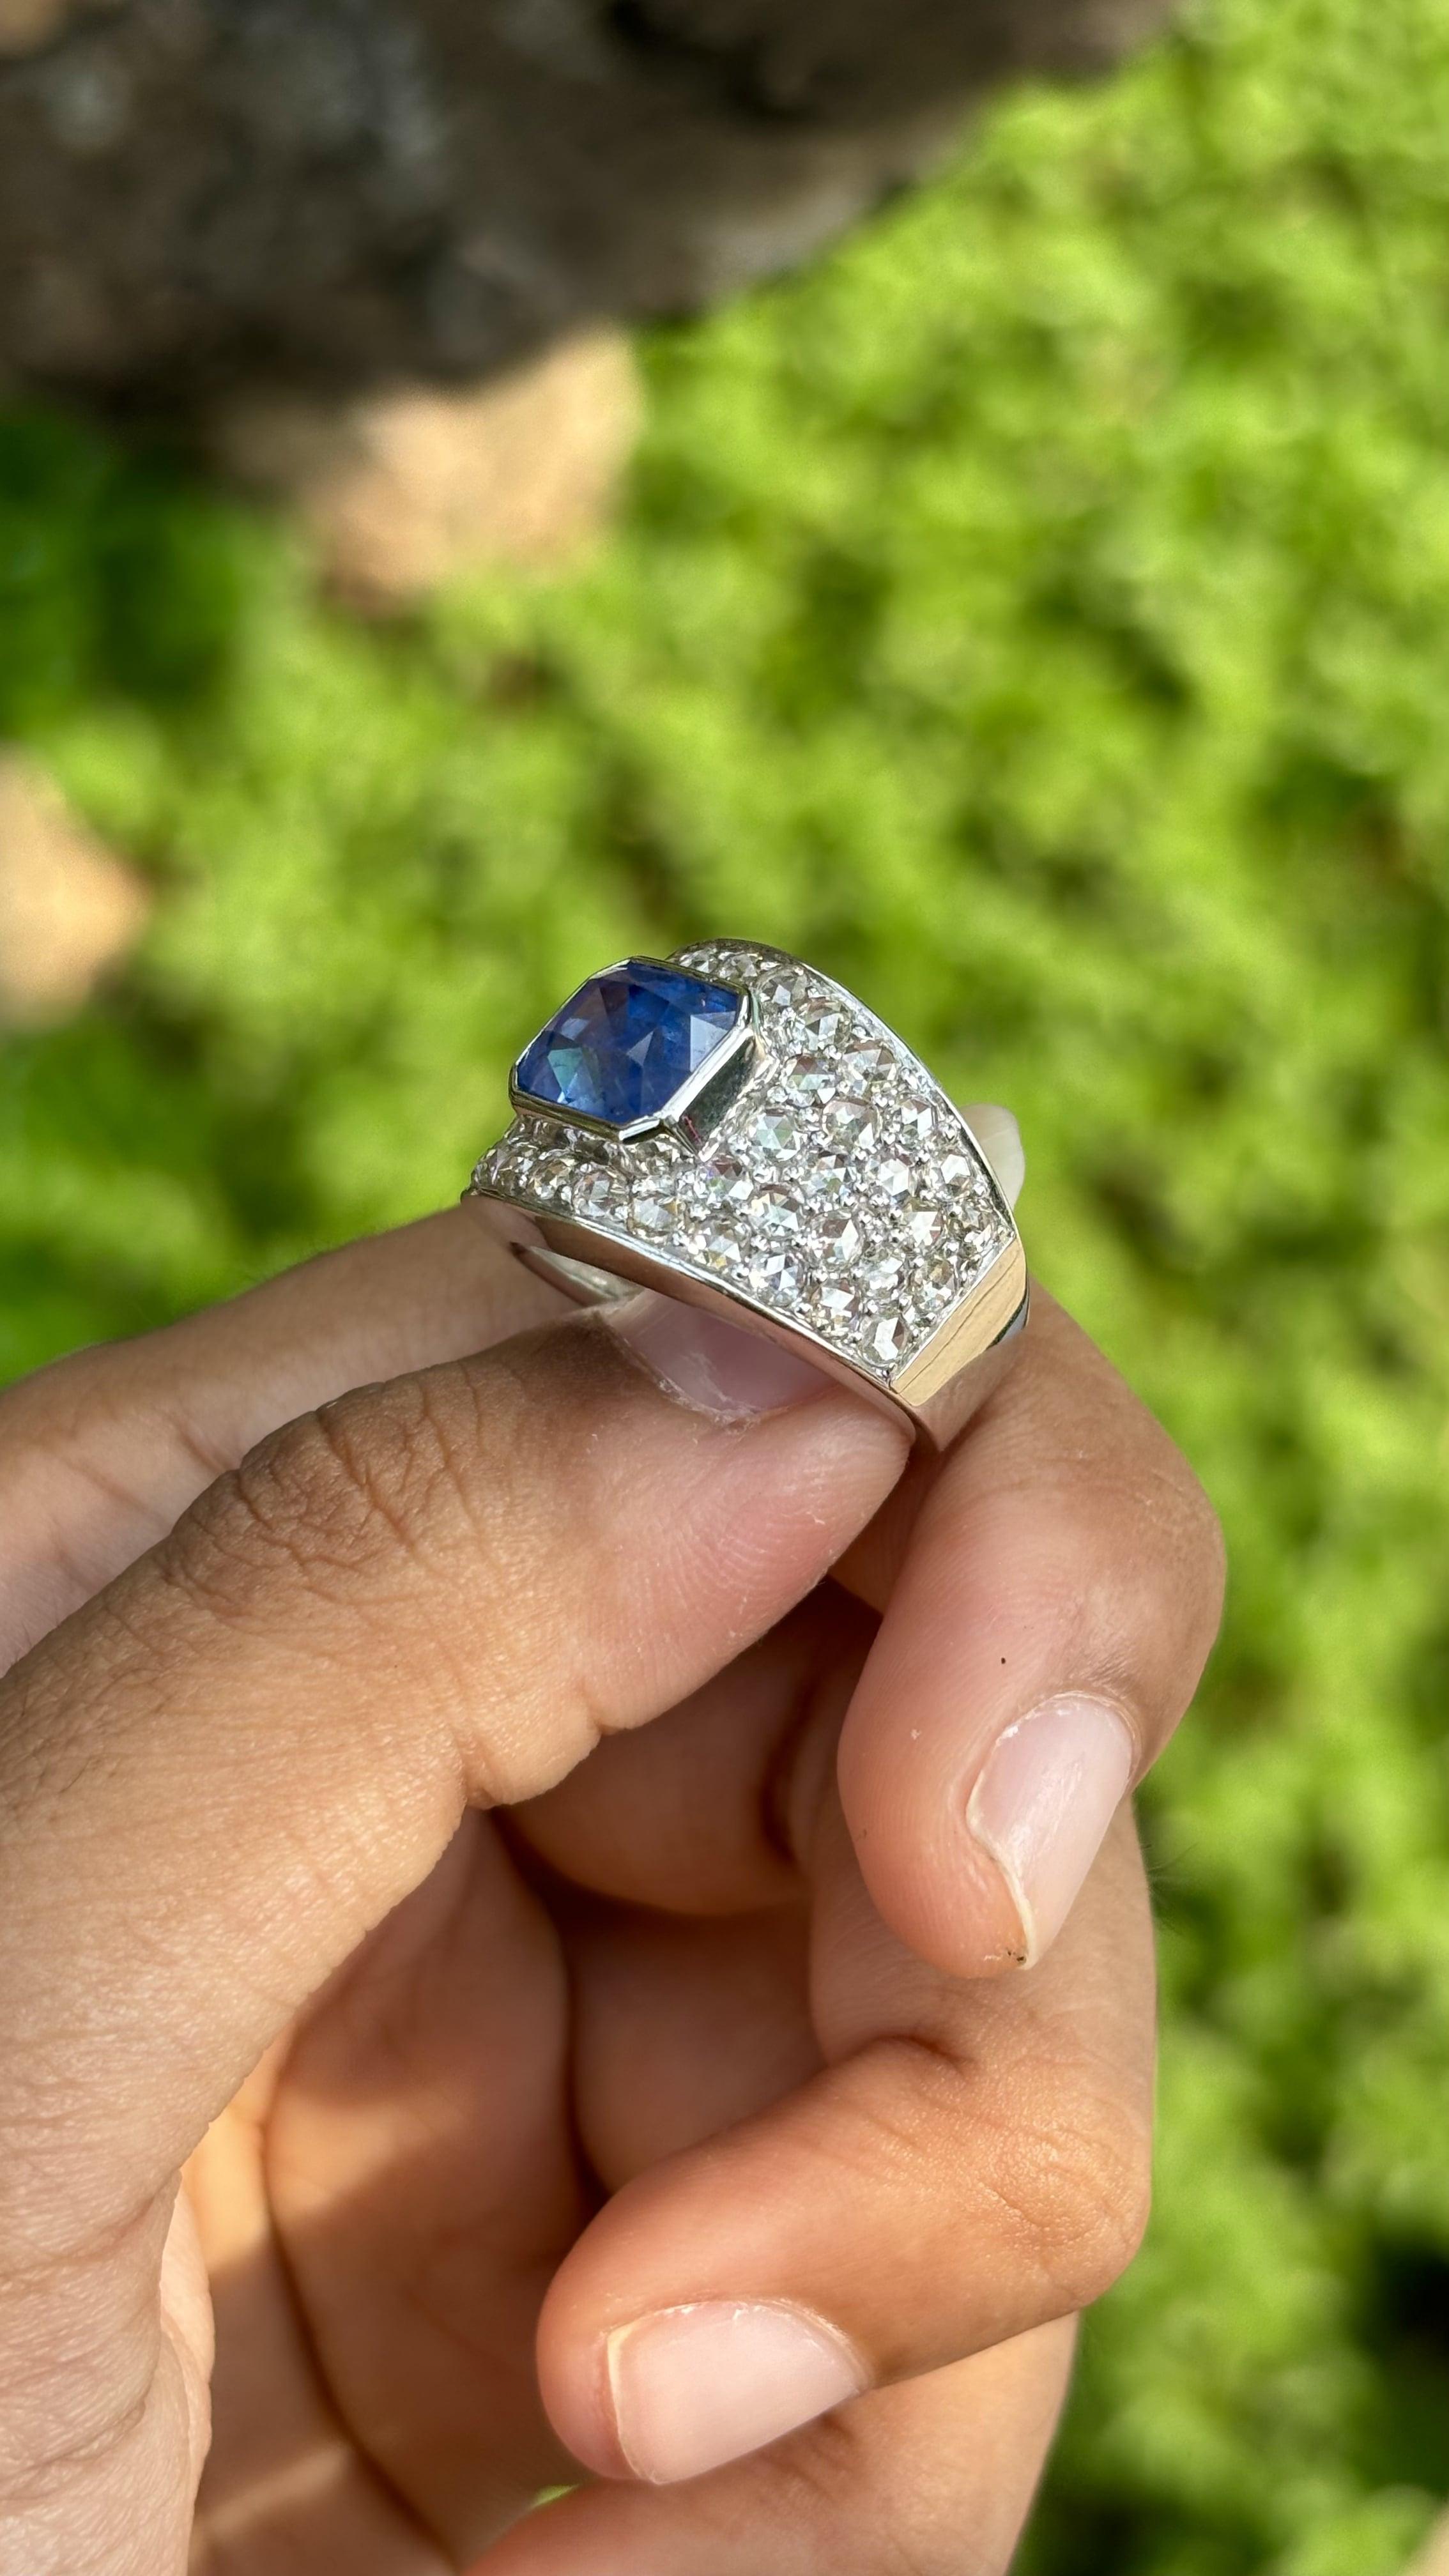 Men's 3.56 Carat Ceylon Sapphire Ring with Rose Cut Diamonds in 14k White Gold  For Sale 8